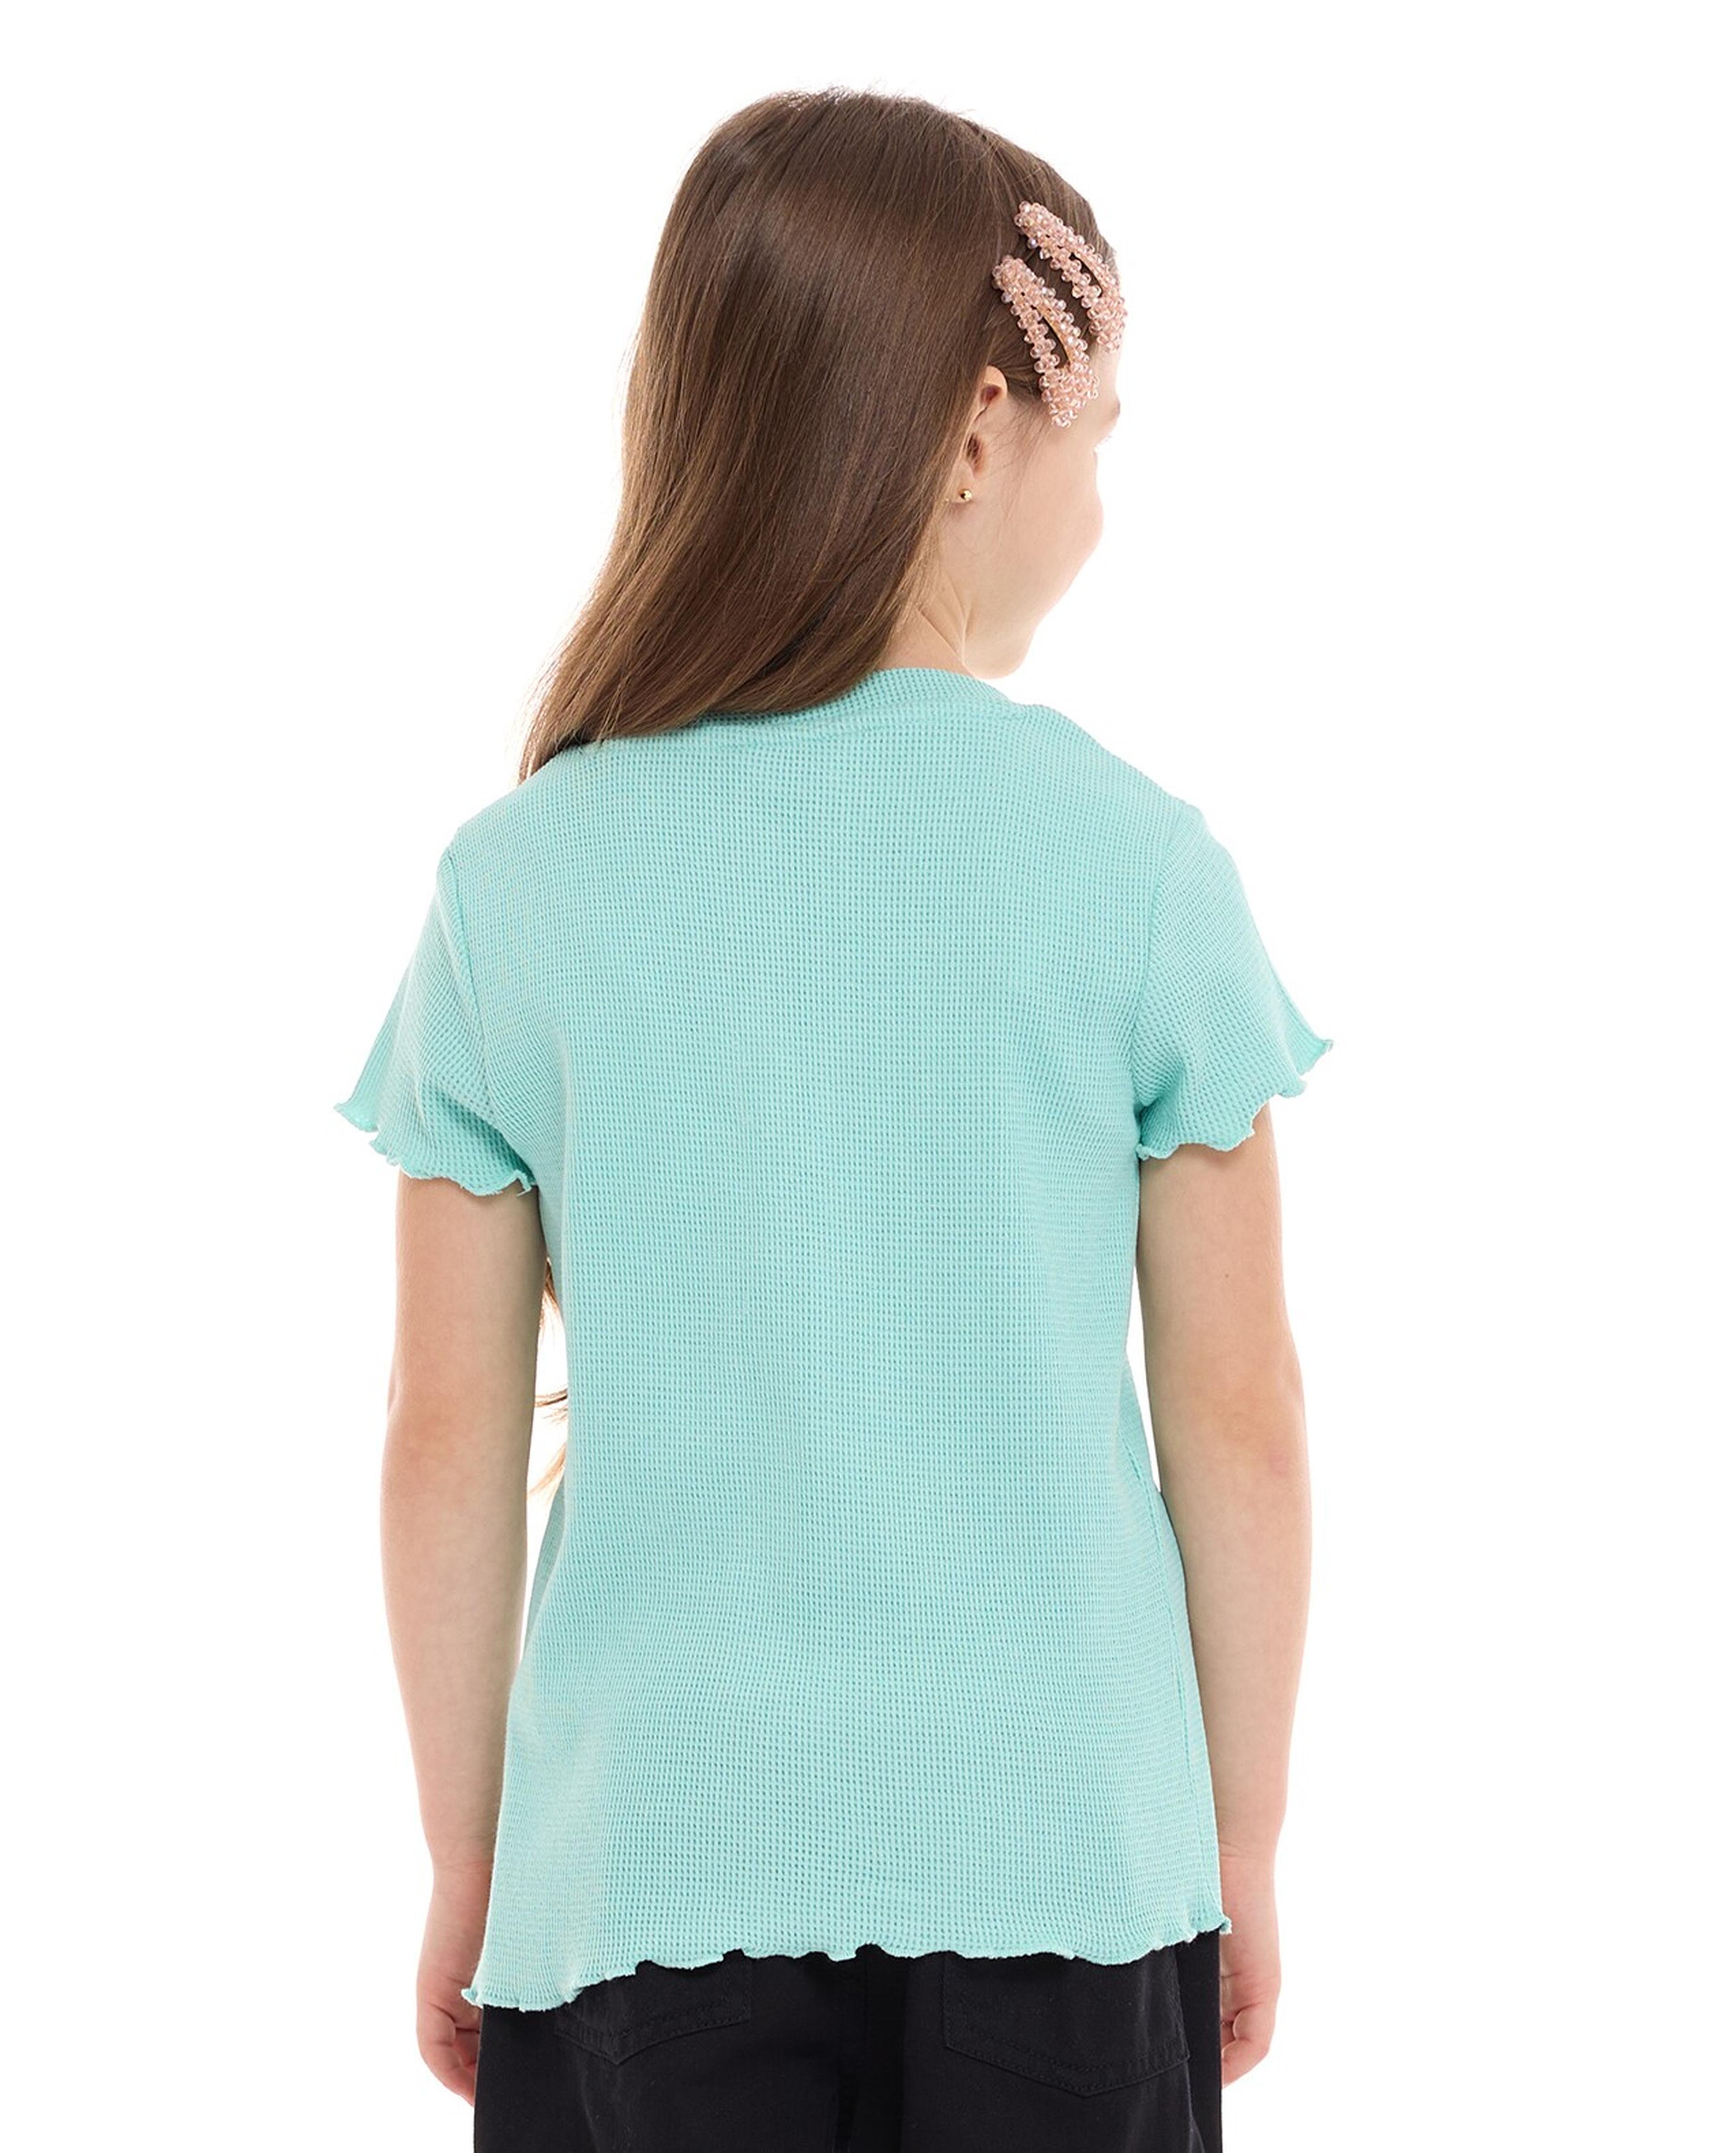 Textured Top with Crew Neck and Short Sleeves